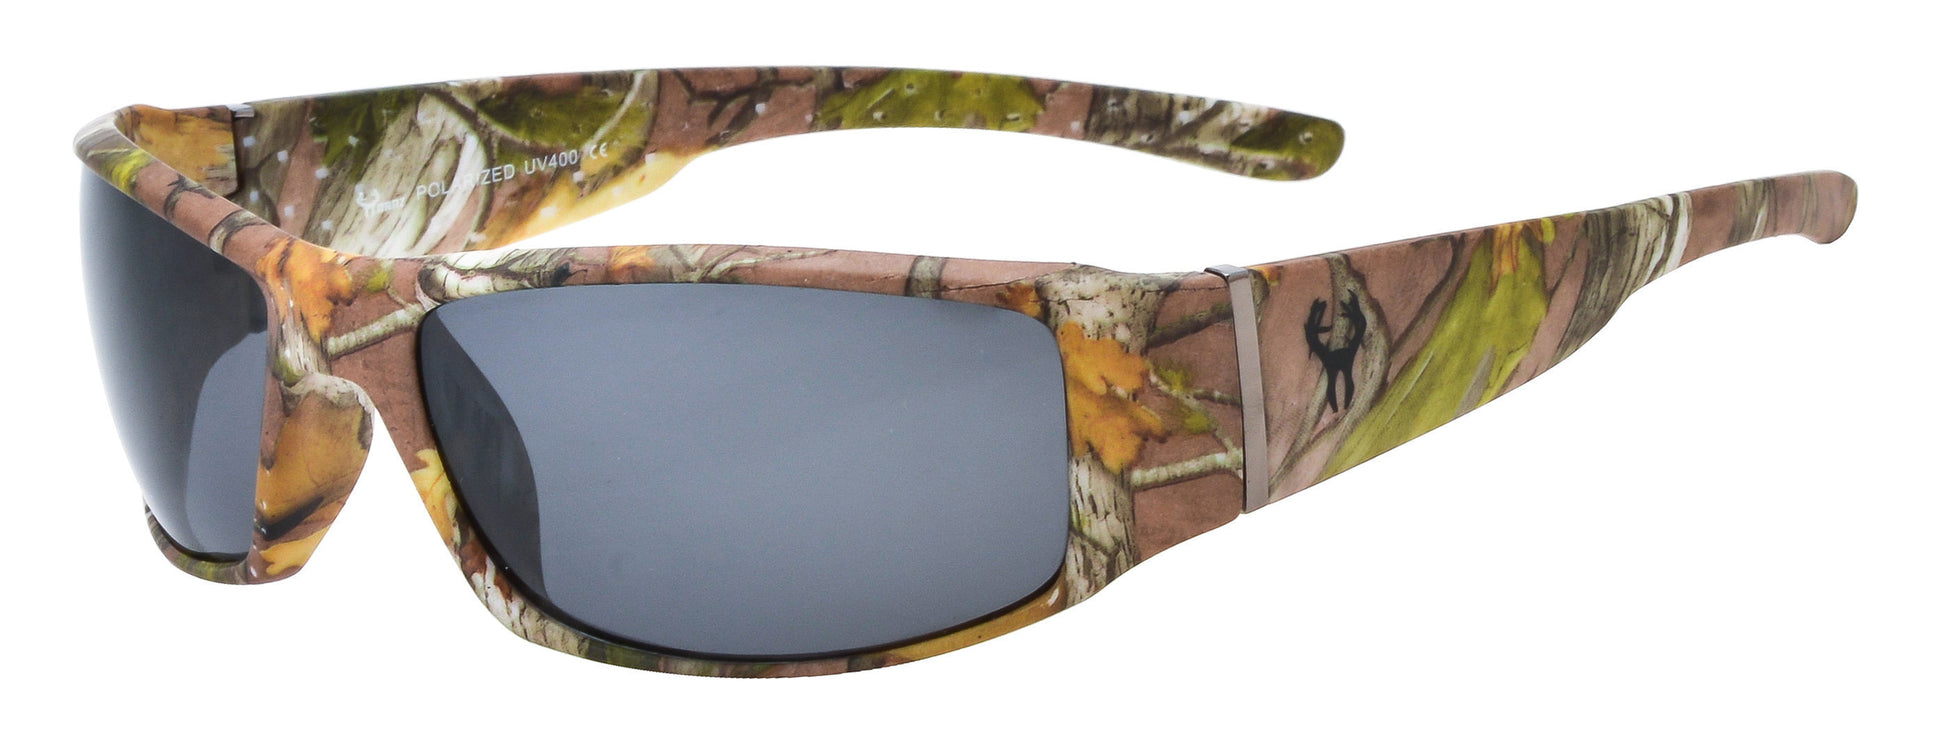 Main image: Hornz Brown Forrest Camouflage Polarized Sunglasses for Men Full Frame Wide Arms & Free Matching Microfiber Pouch – Brown Camo Frame - Smoke Lens